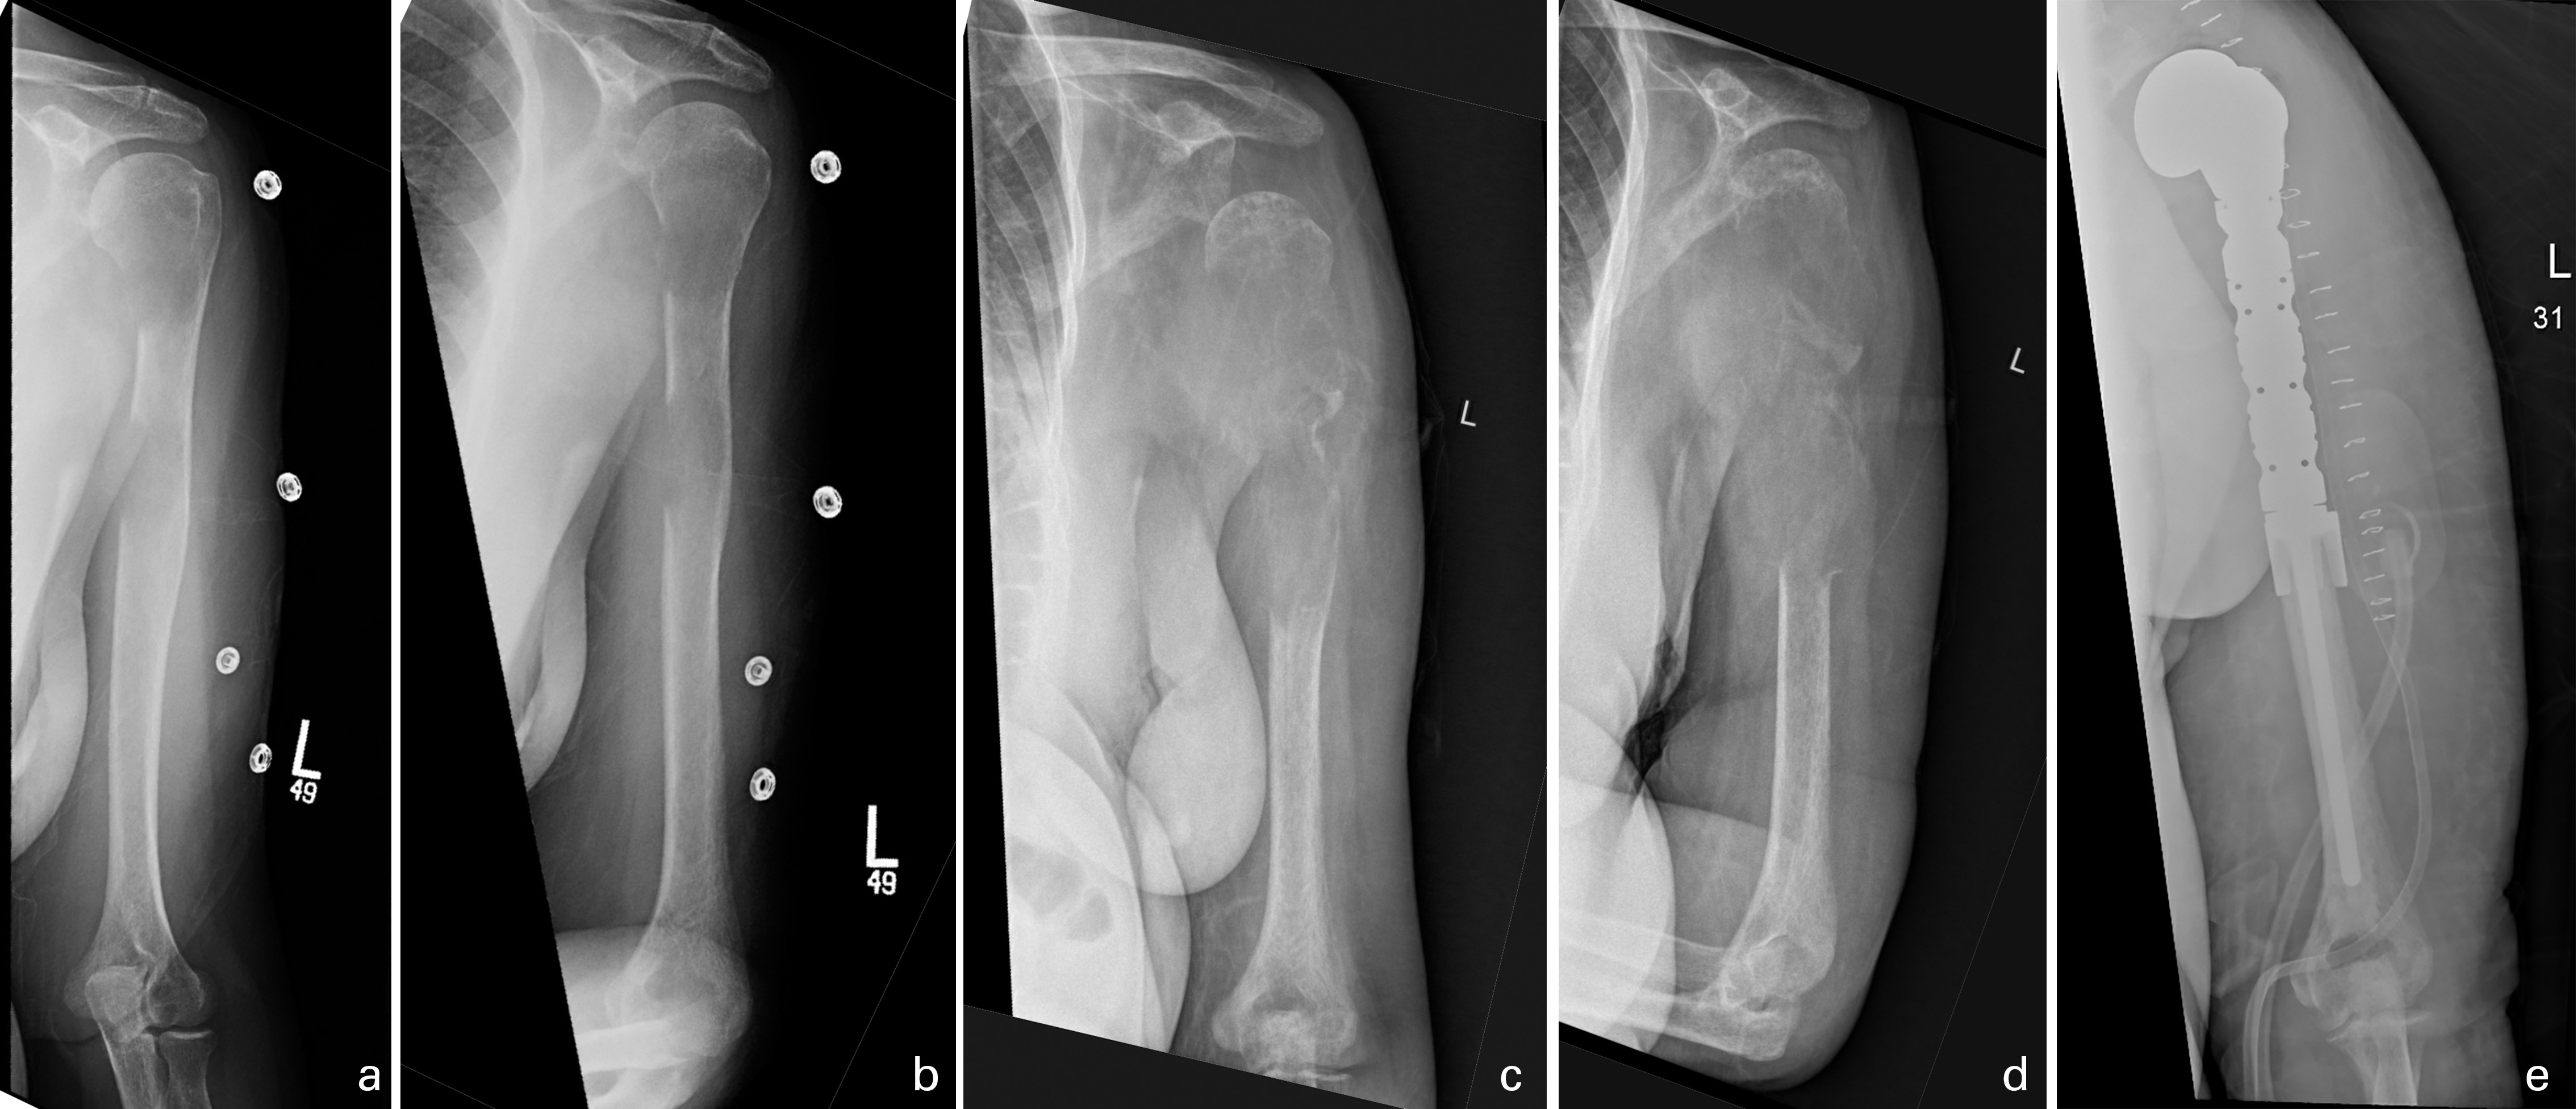 Fig. 2 
          76-year-old female with poorly differentiated metastatic lung carcinoma to bone, prioritized as level III. Anteroposterior (AP), external rotation, and internal rotation radiographs of the left humerus, a) and b) 11 February 2020 and c) and d) 24 April 2020. e) Postoperative AP view, 2 May 2020. Extensive progressive interval osseous destruction with extraosseous soft tissue mass involving the left proximal humerus to mid-shaft diaphysis with associated pathological fracture. Due to COVID-19 related delays, this patient experienced prolonged pain and disability, unplanned radiation, and local tumour progression resulting in markedly increased surgical complexity.
        